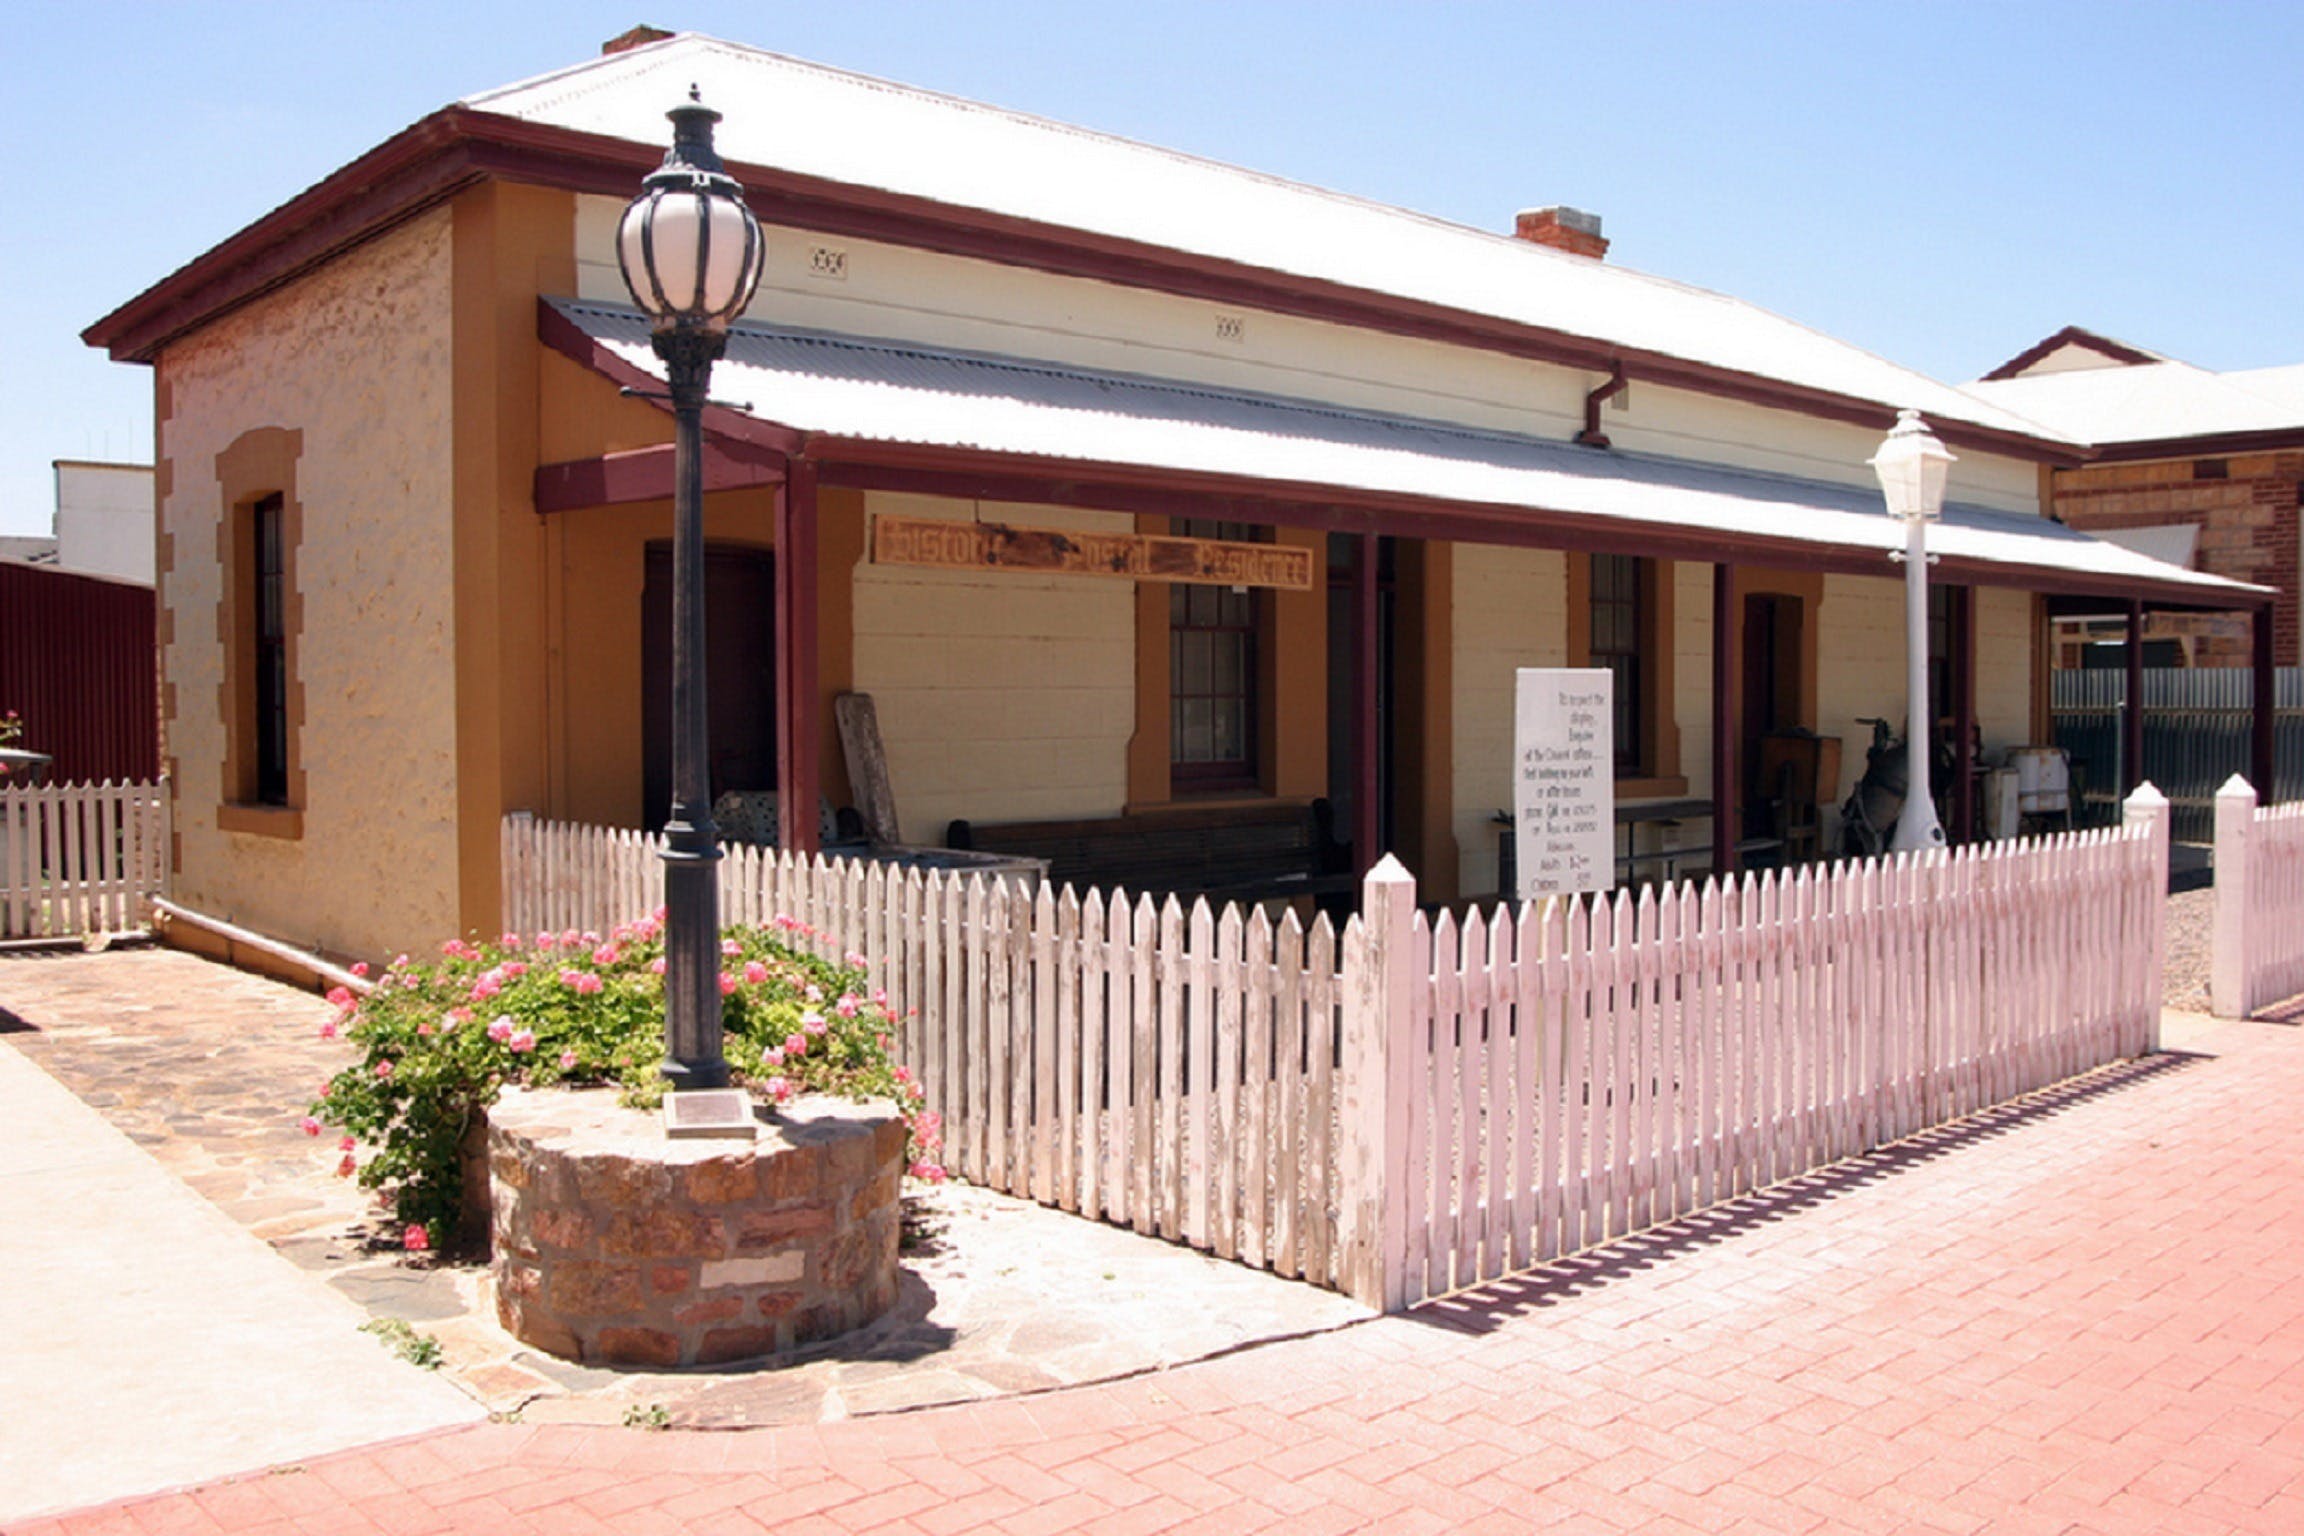 Franklin Harbour Historical Museum - Accommodation Nelson Bay